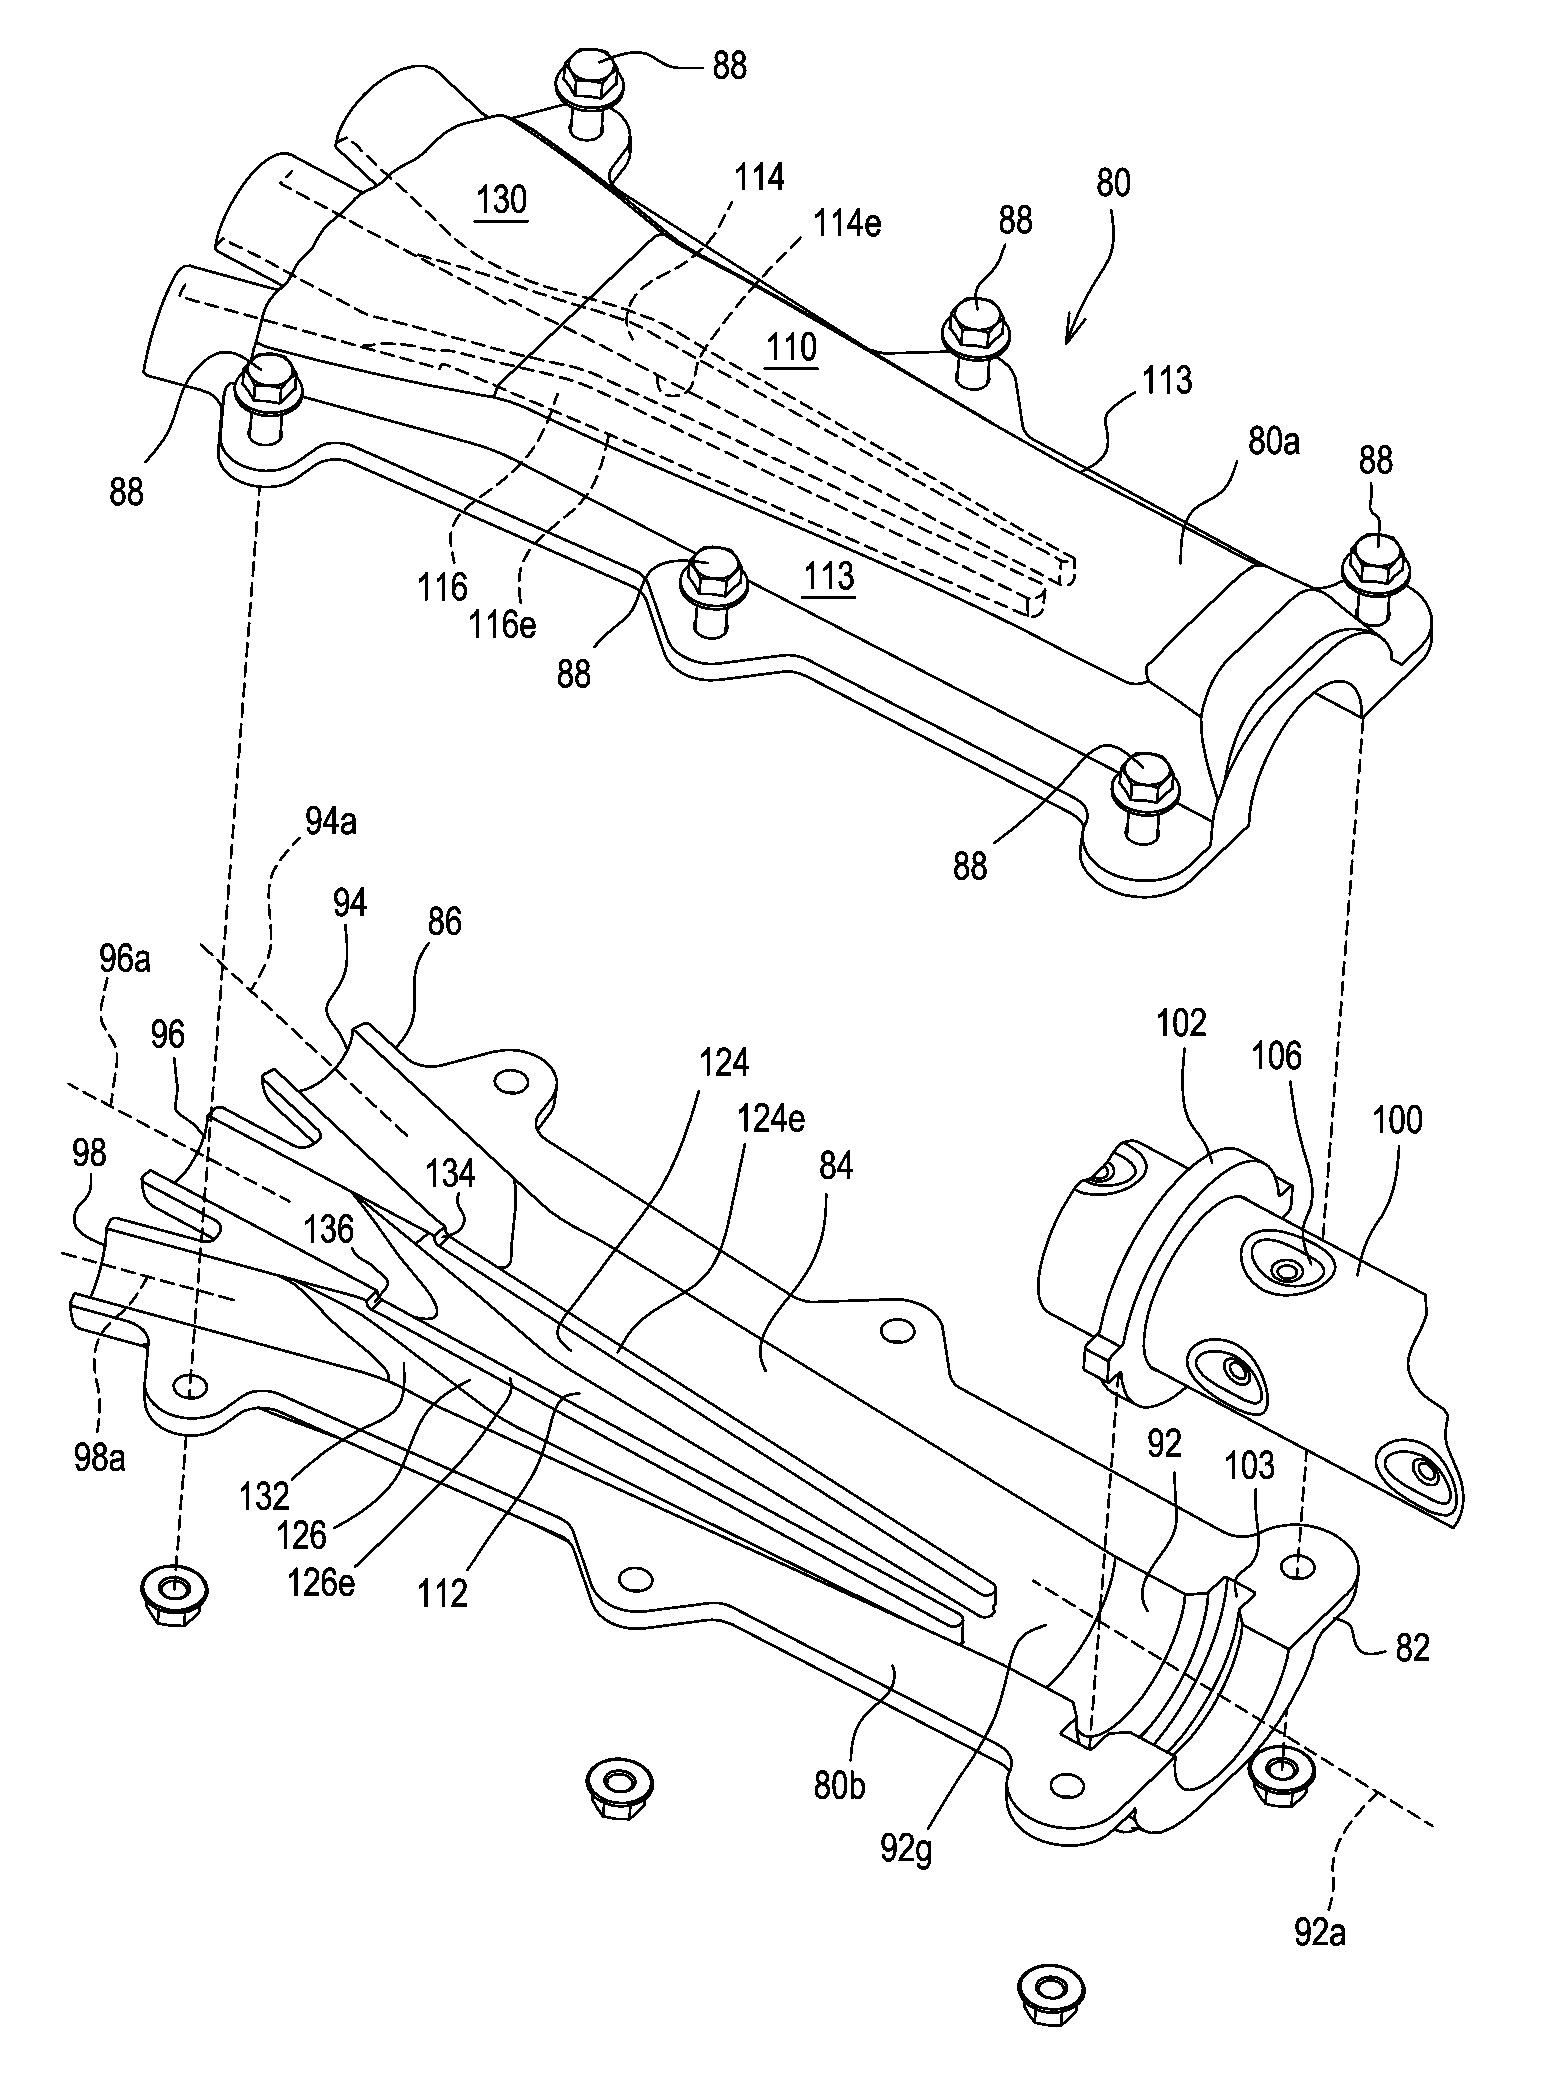 Commodity Splitter for an Air Delivery System